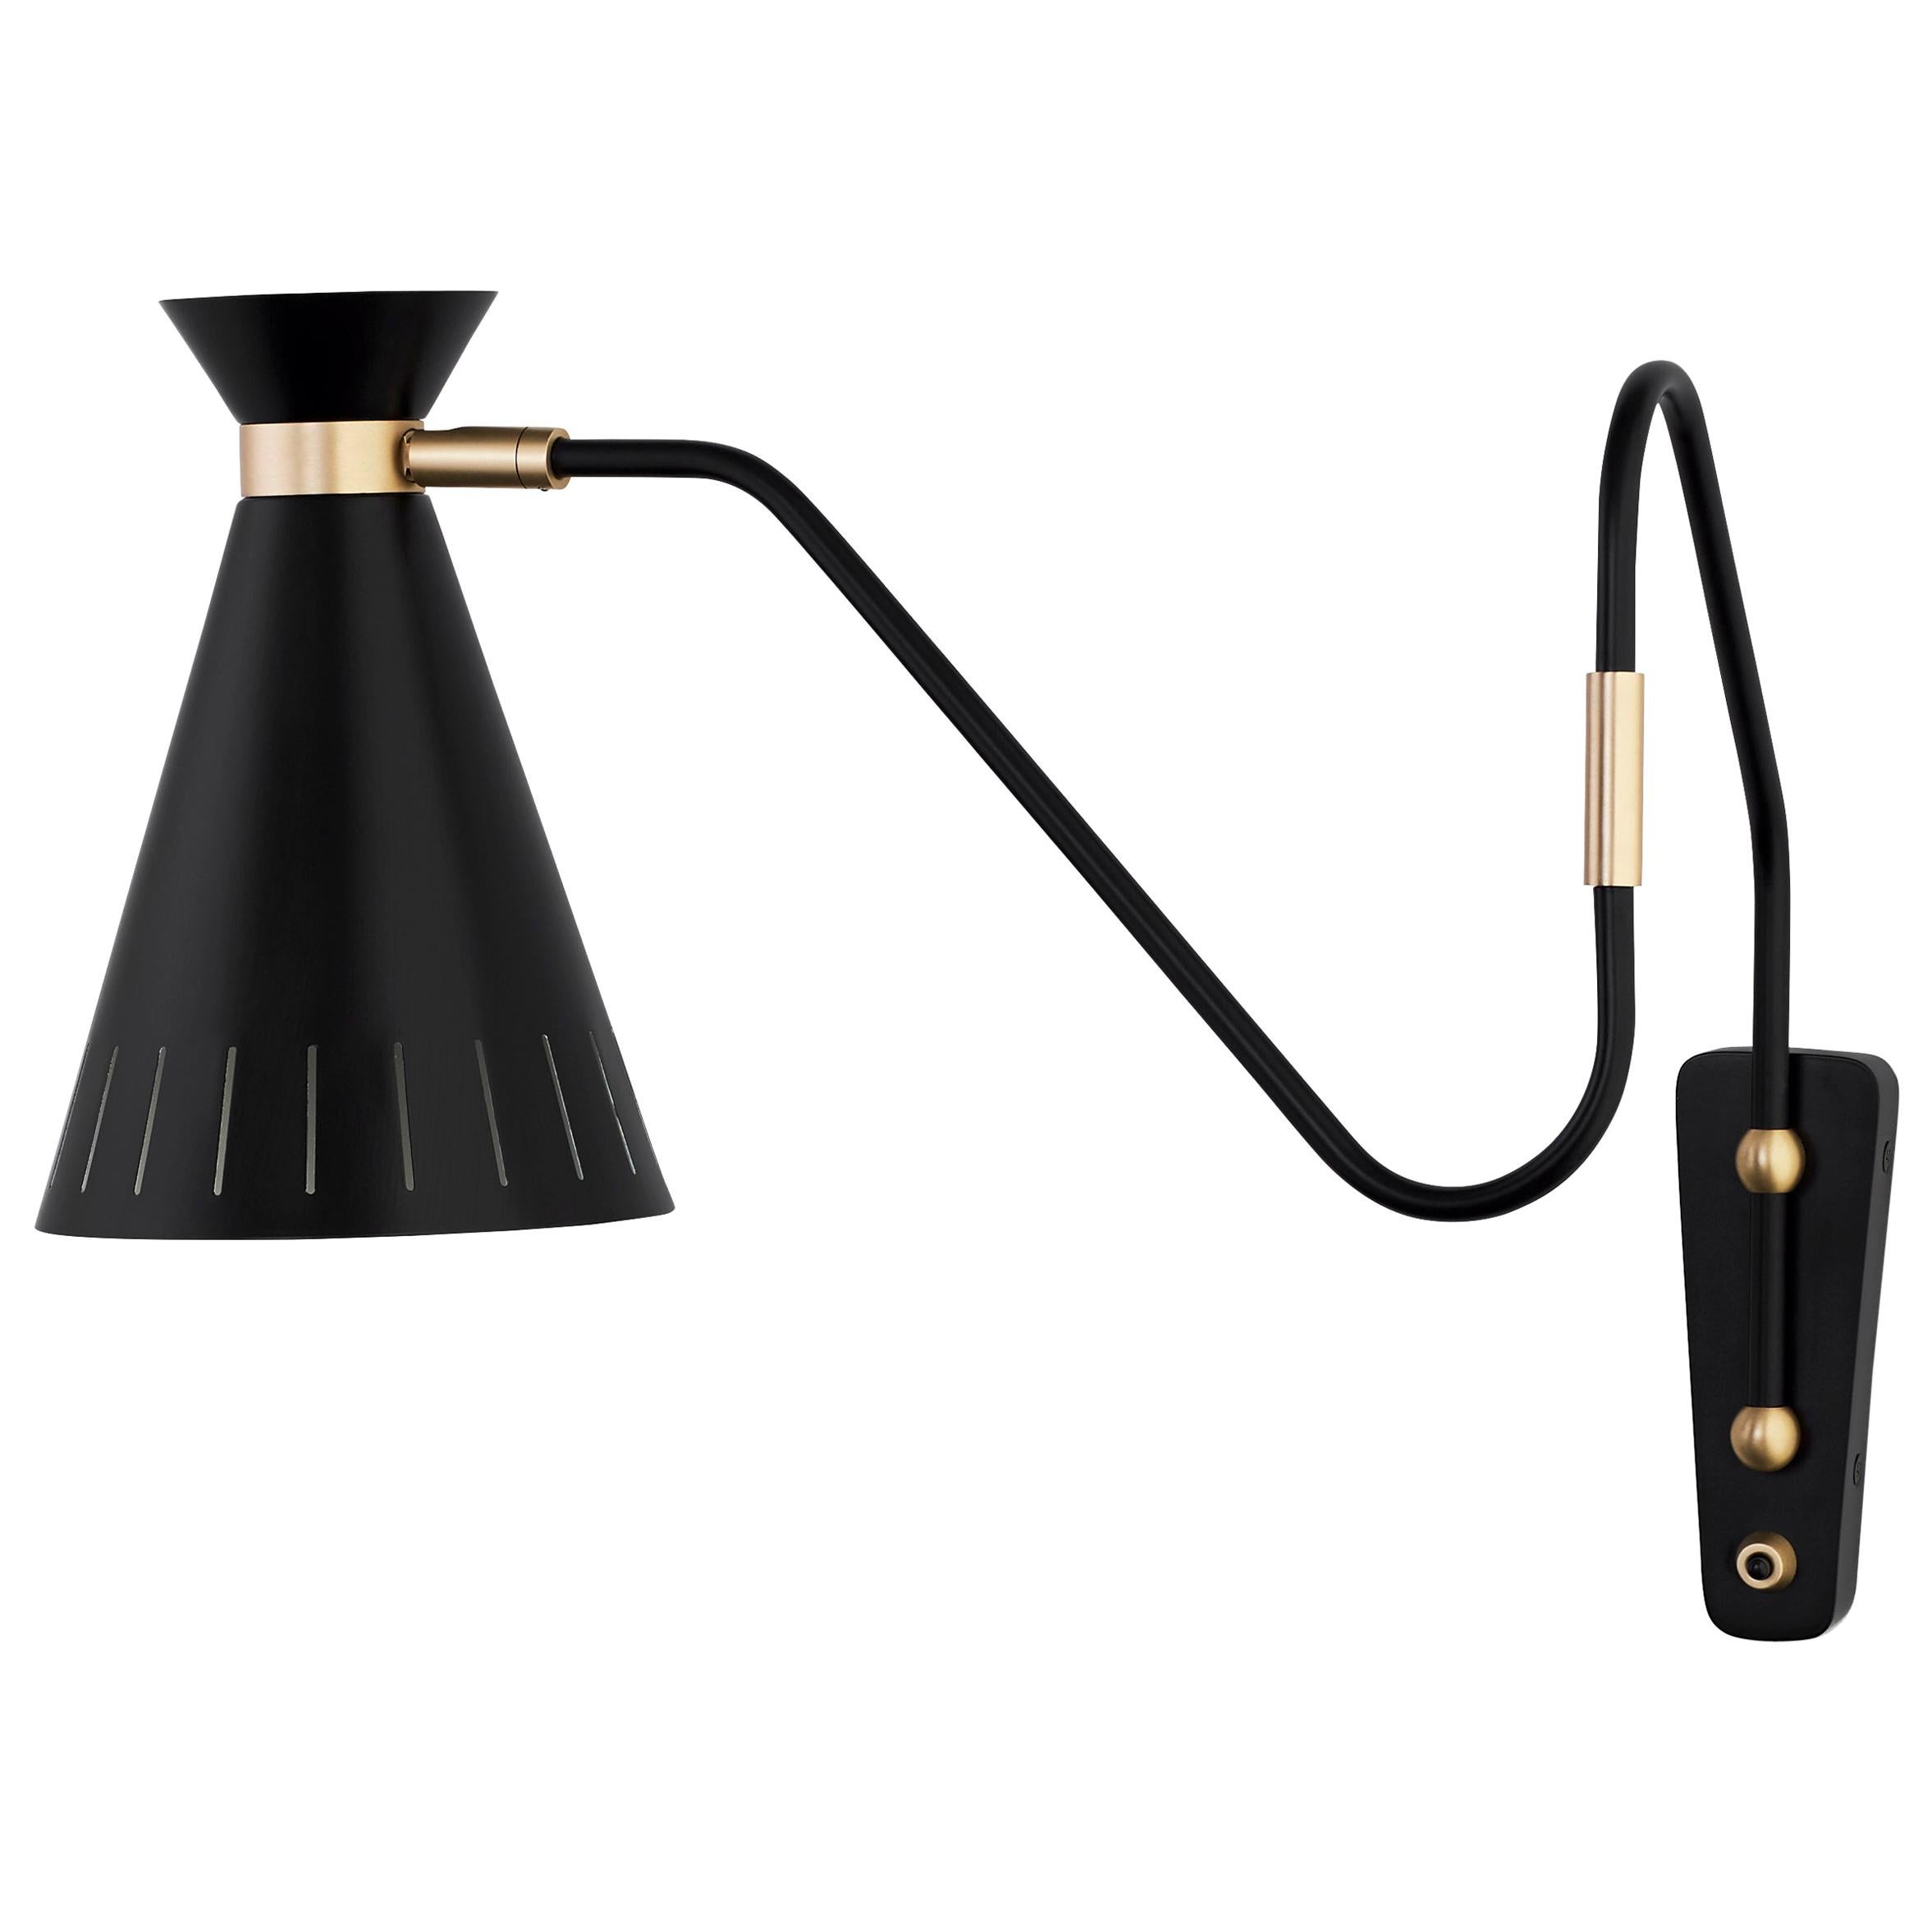 Cone Wall Lamp, by Svend Aage Holm-Sørensen from Warm Nordic